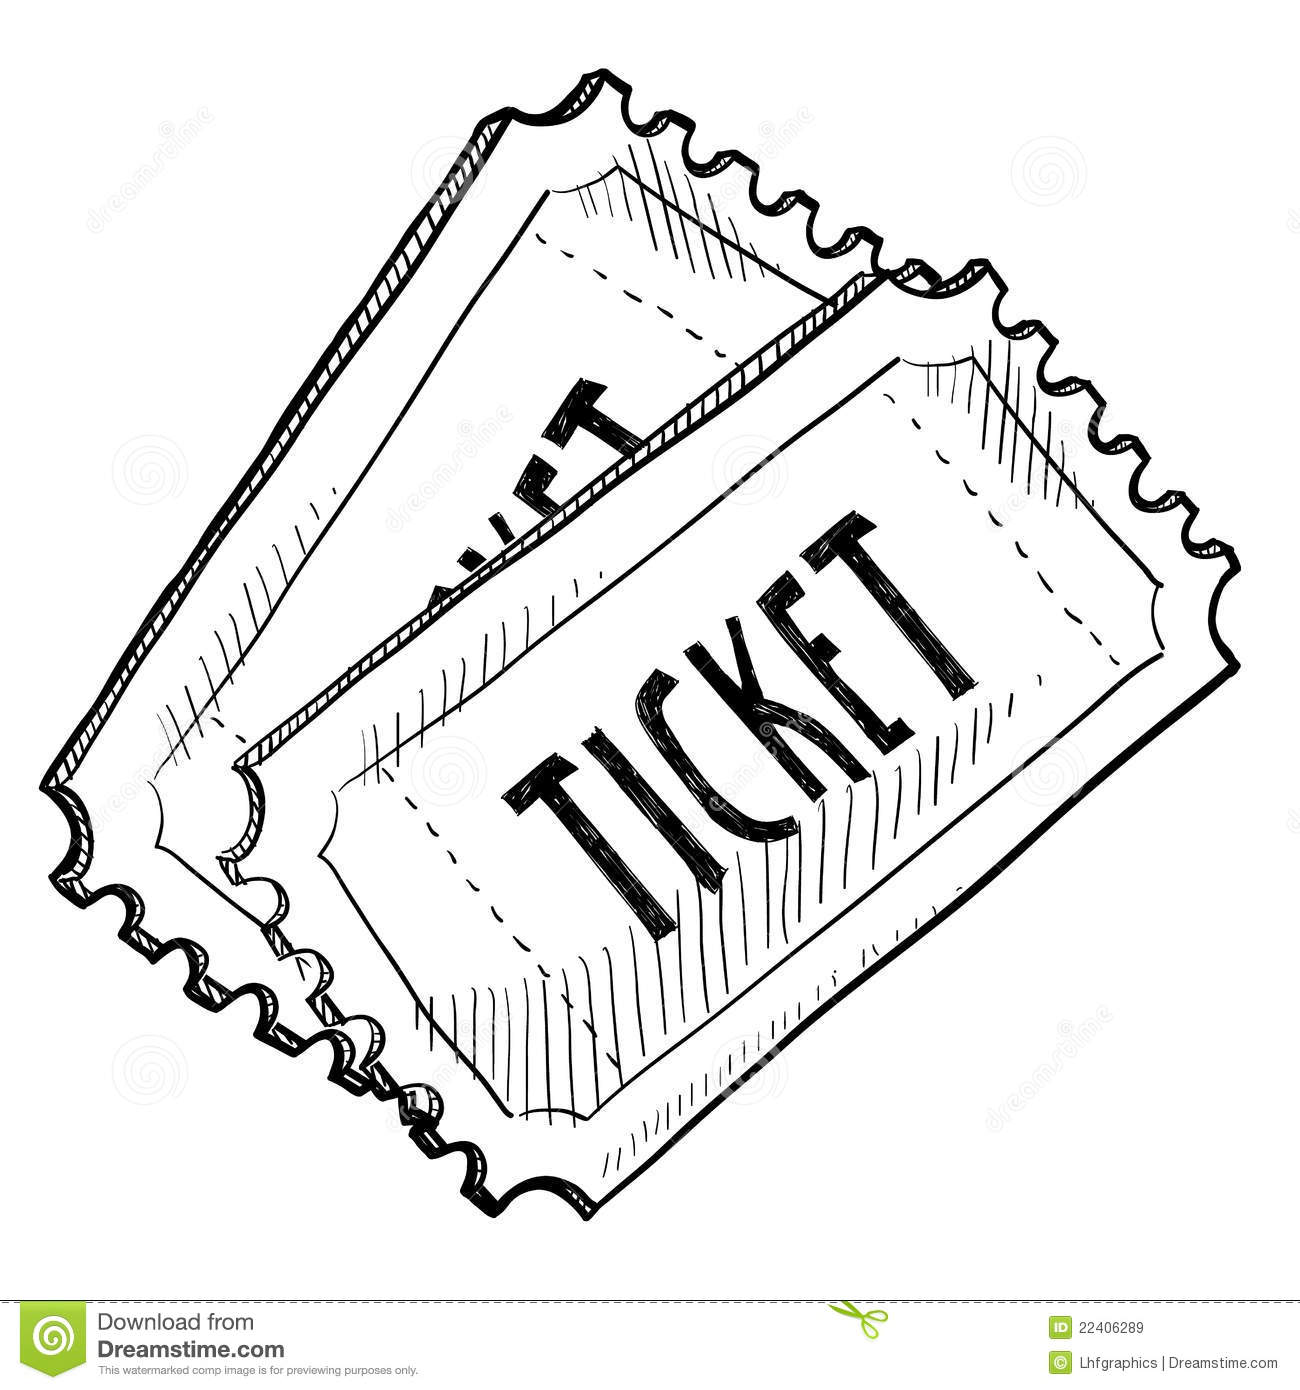 Concert or event ticket drawi - Raffle Ticket Clip Art